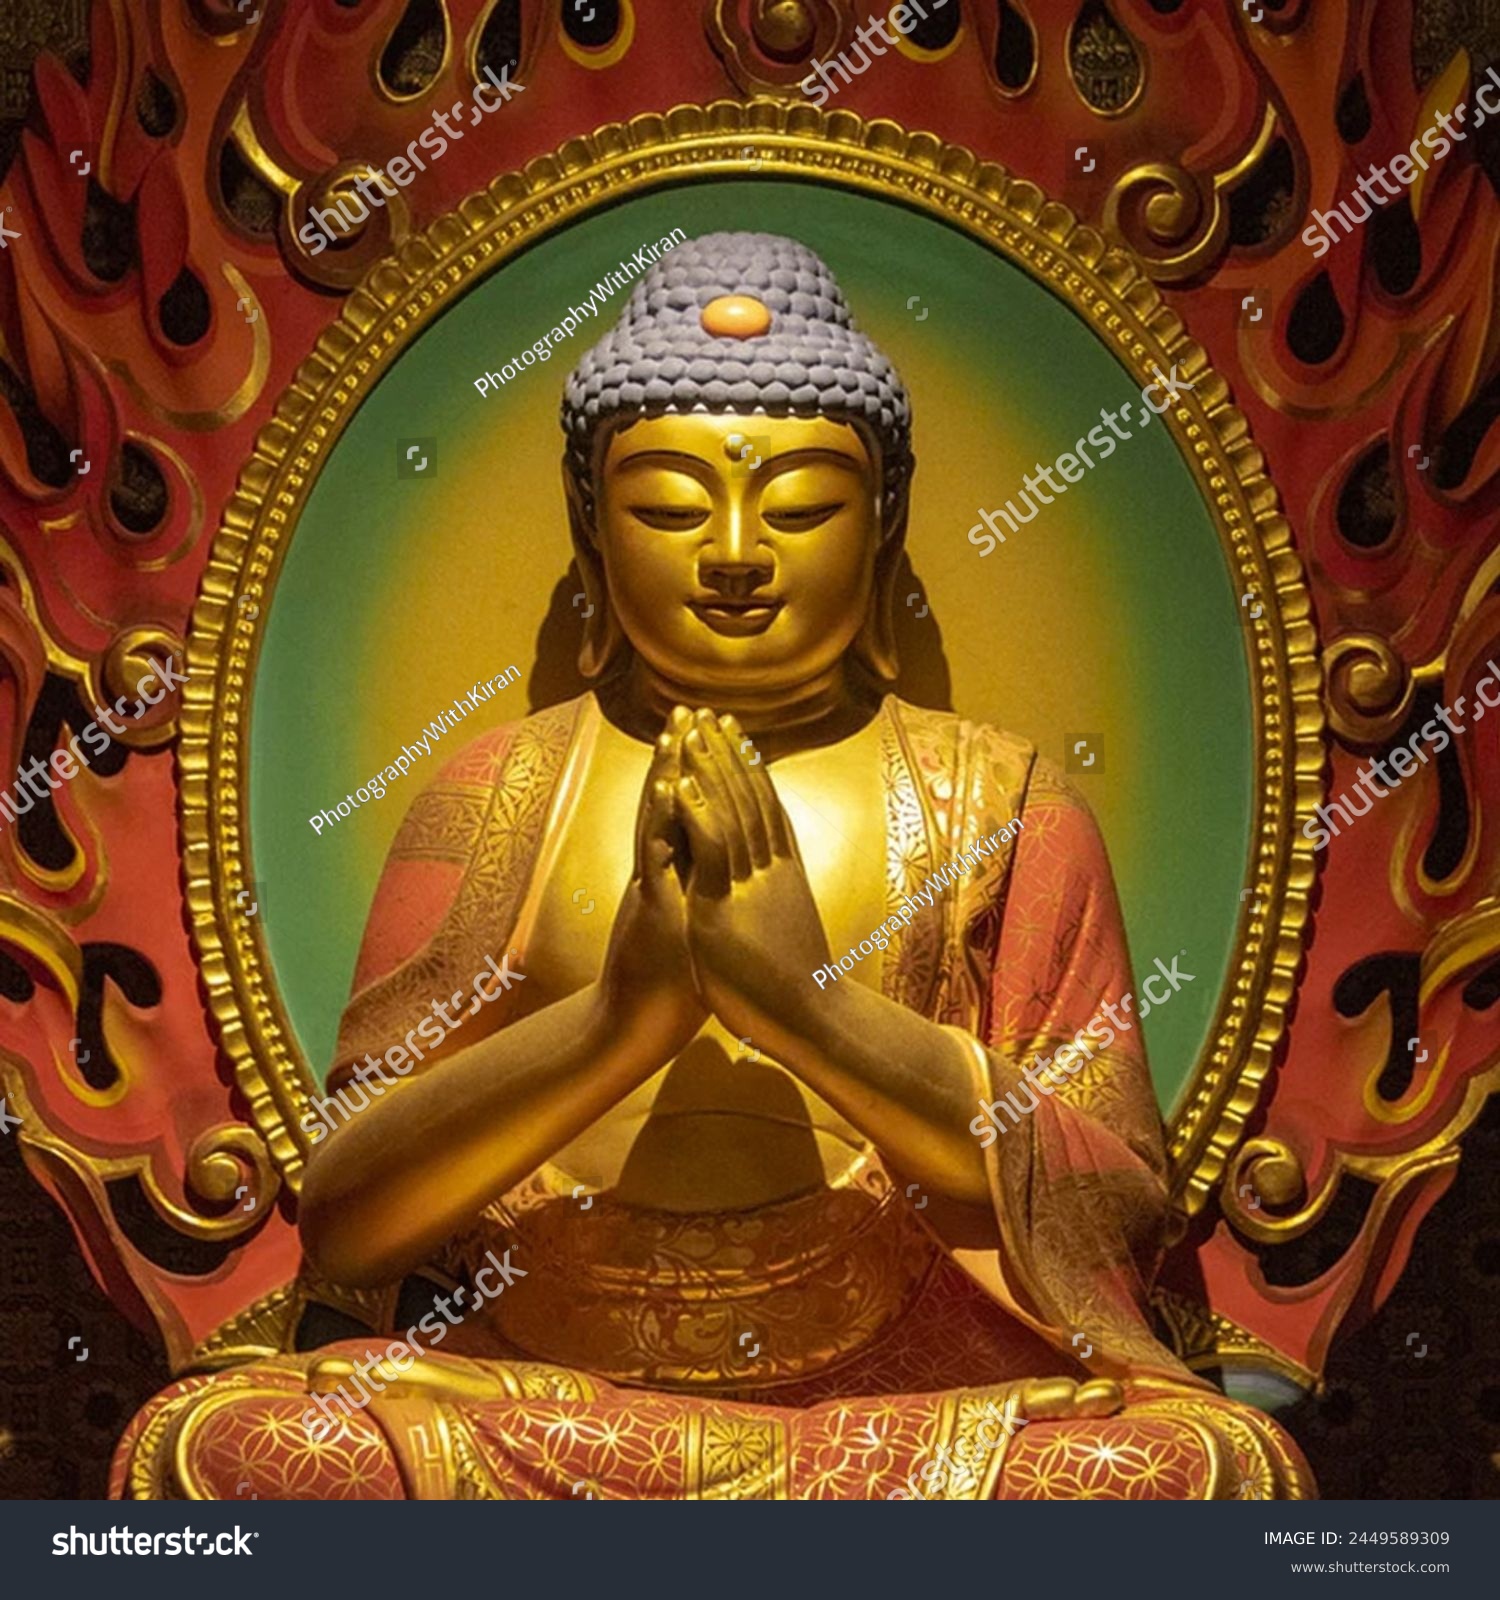 Lord Buddha is regarded as the founder of the world religion of Buddhism, and revered by most Buddhist schools as a savior, the Enlightened One who rediscovered an ancient path to release clinging  #2449589309